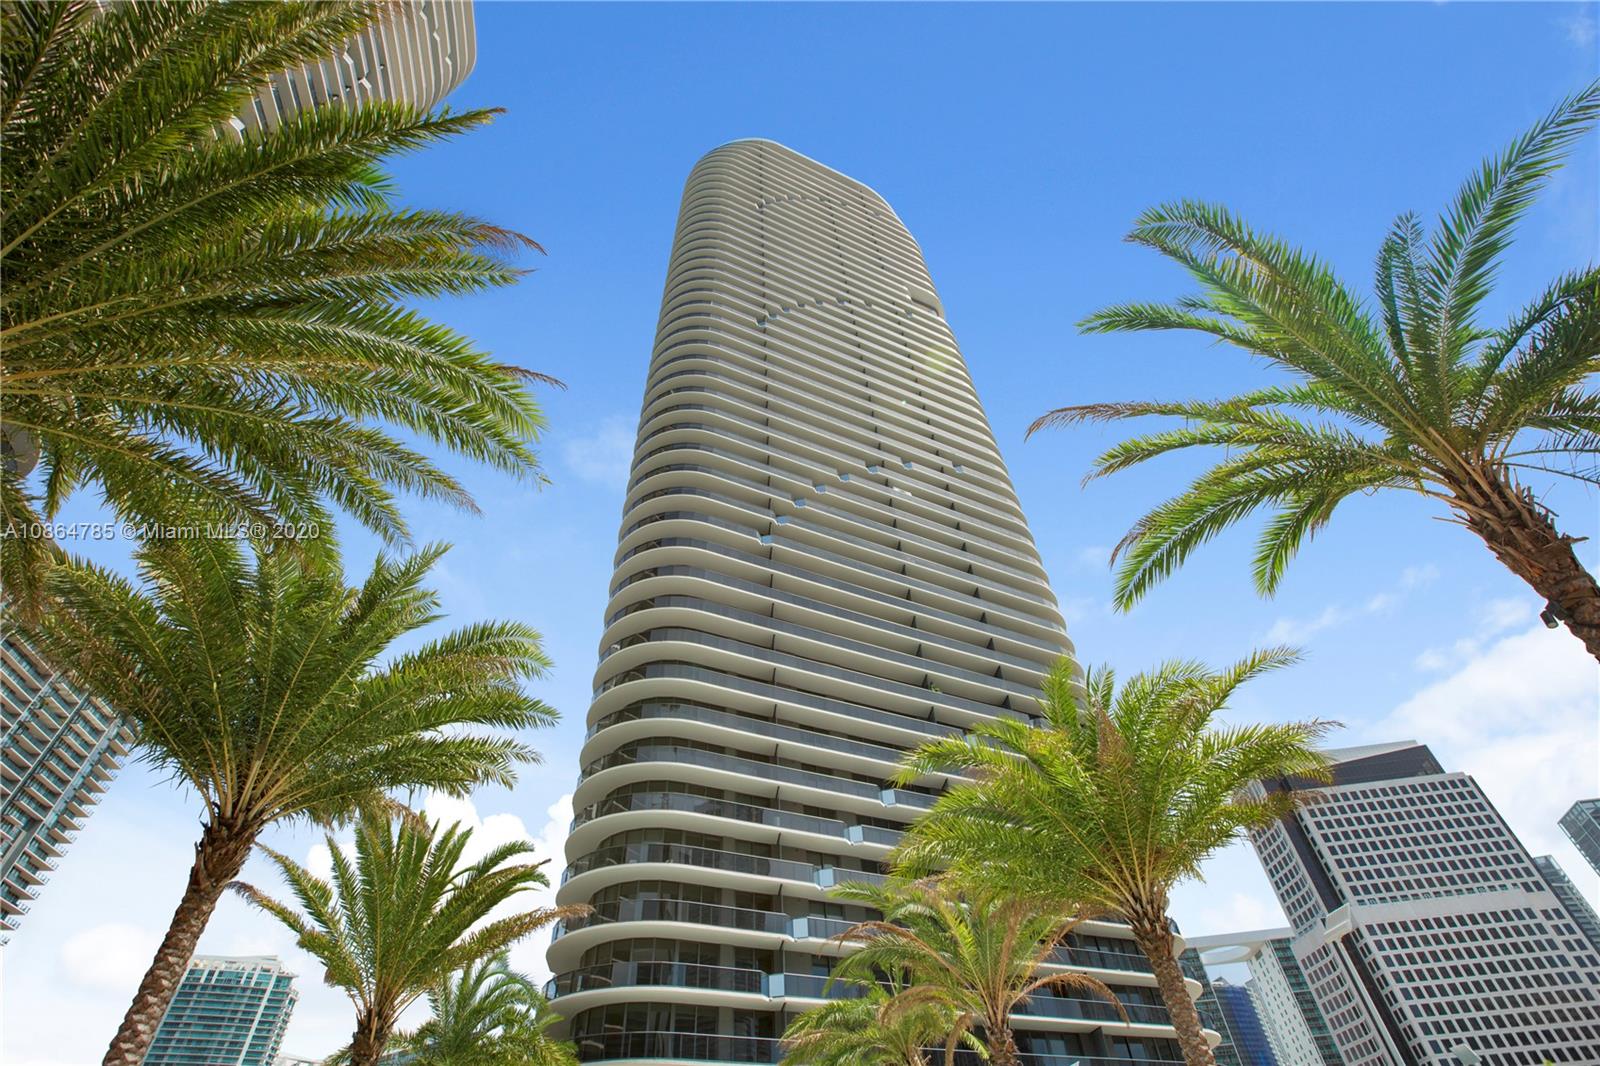 a view of a tall white building with a palm tree in the background